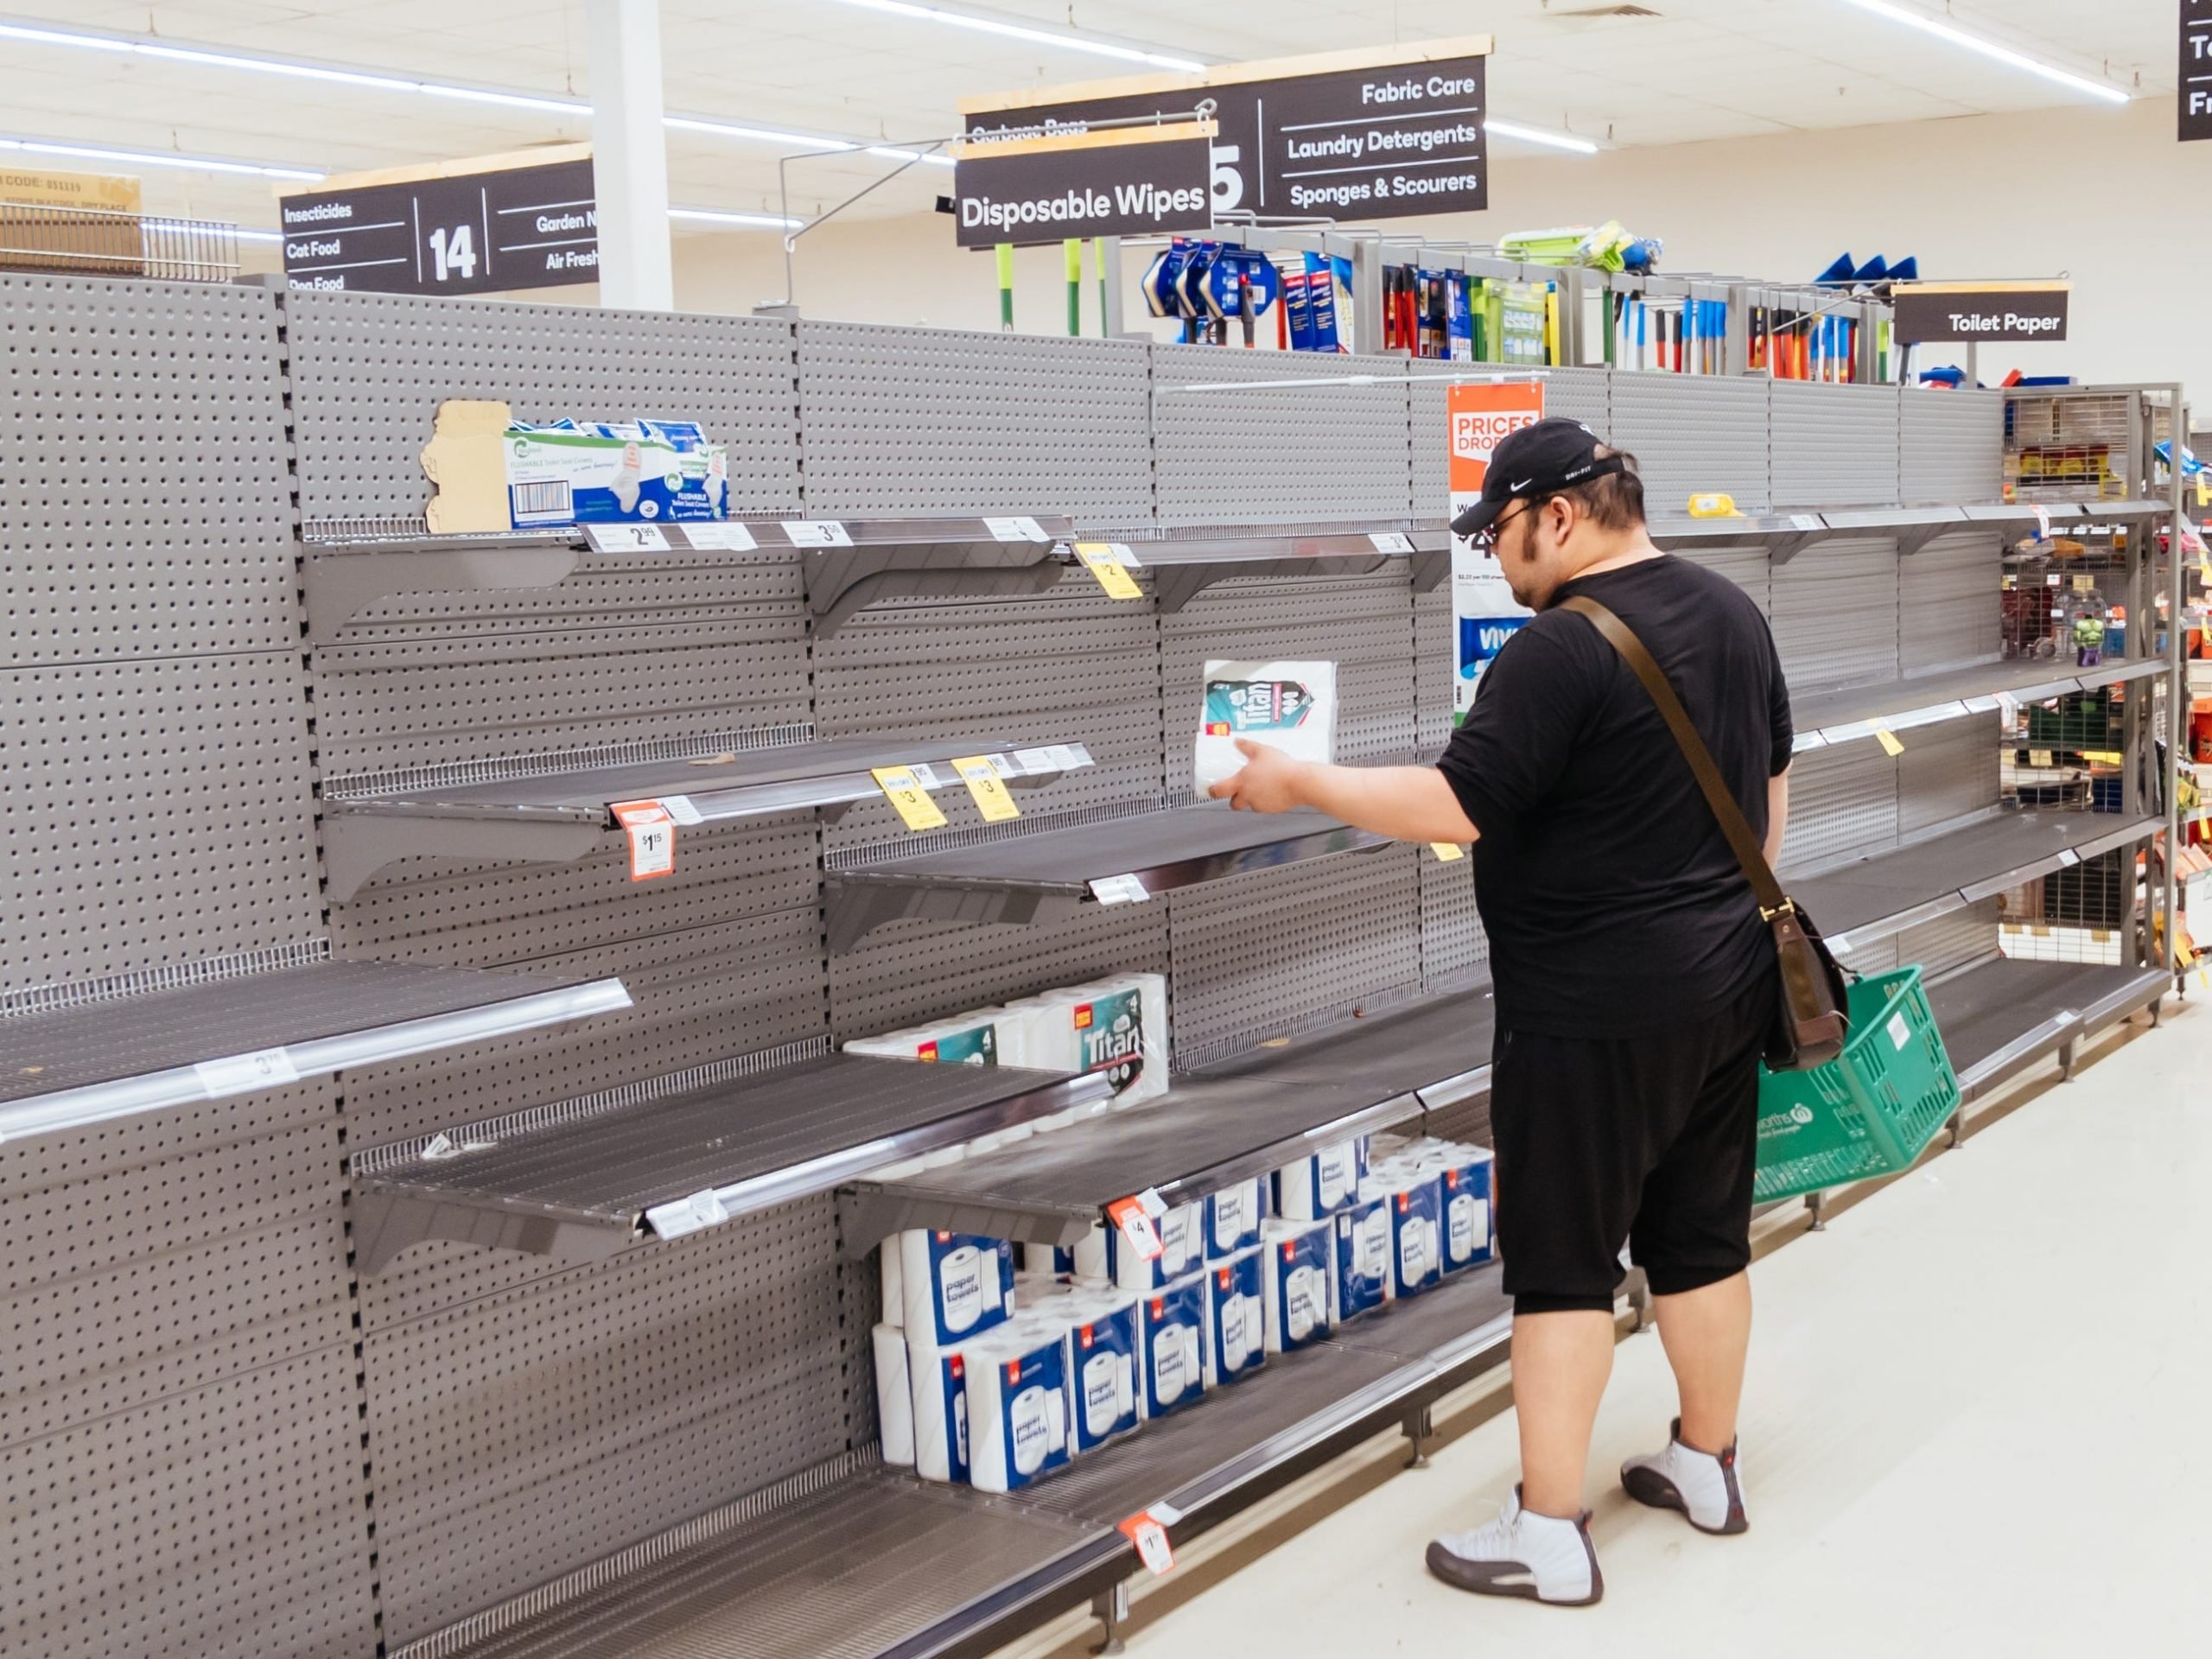 Empty supermarket shelves - A man looks for toilet paper in an Australian supermarket after panic buying due to the Coronavirus March 2020